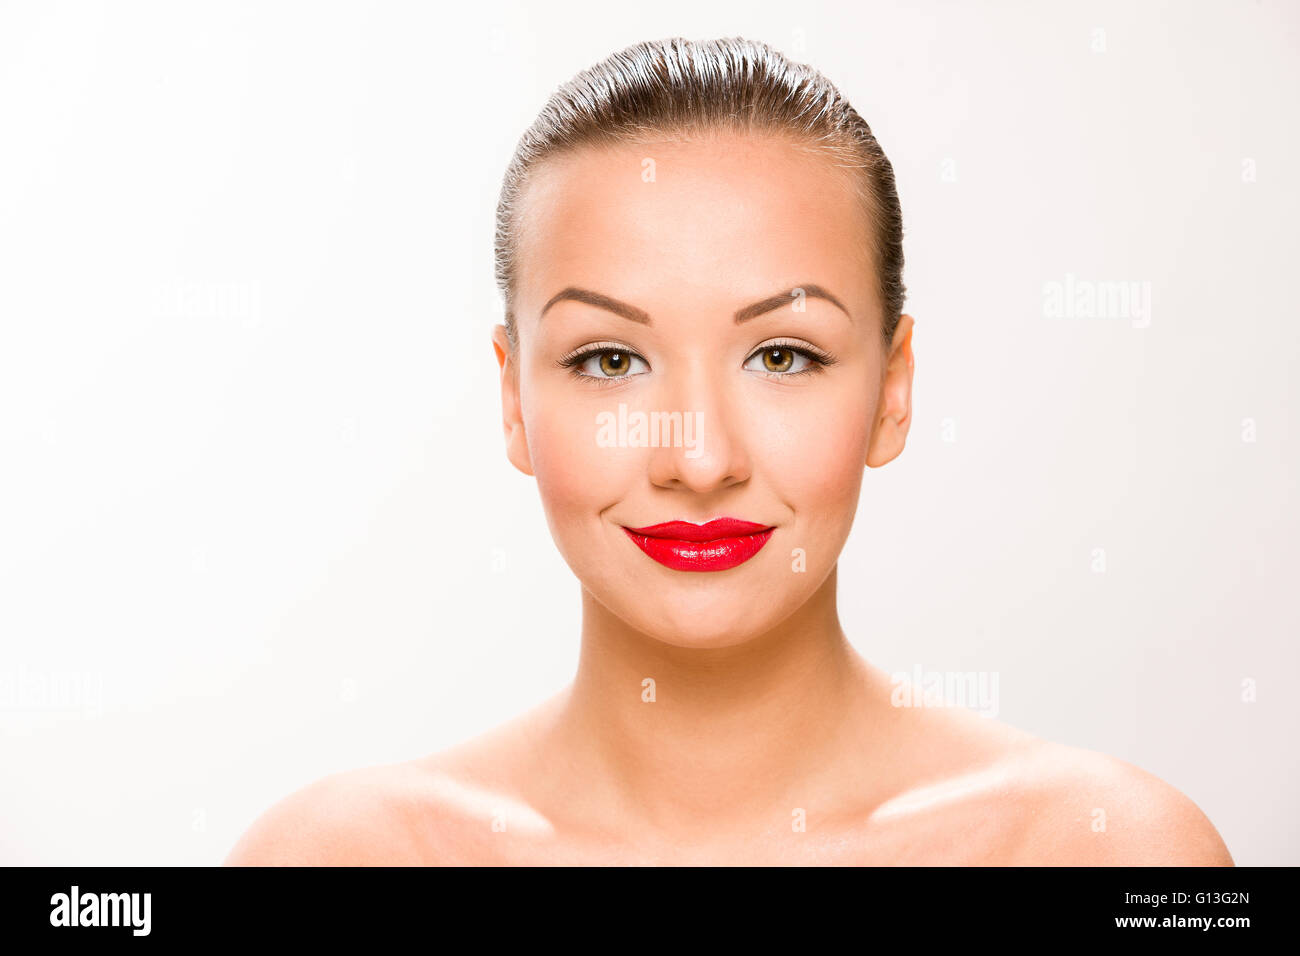 Brown sleek hair beautiful woman with with red lips looking at camera. Stock Photo